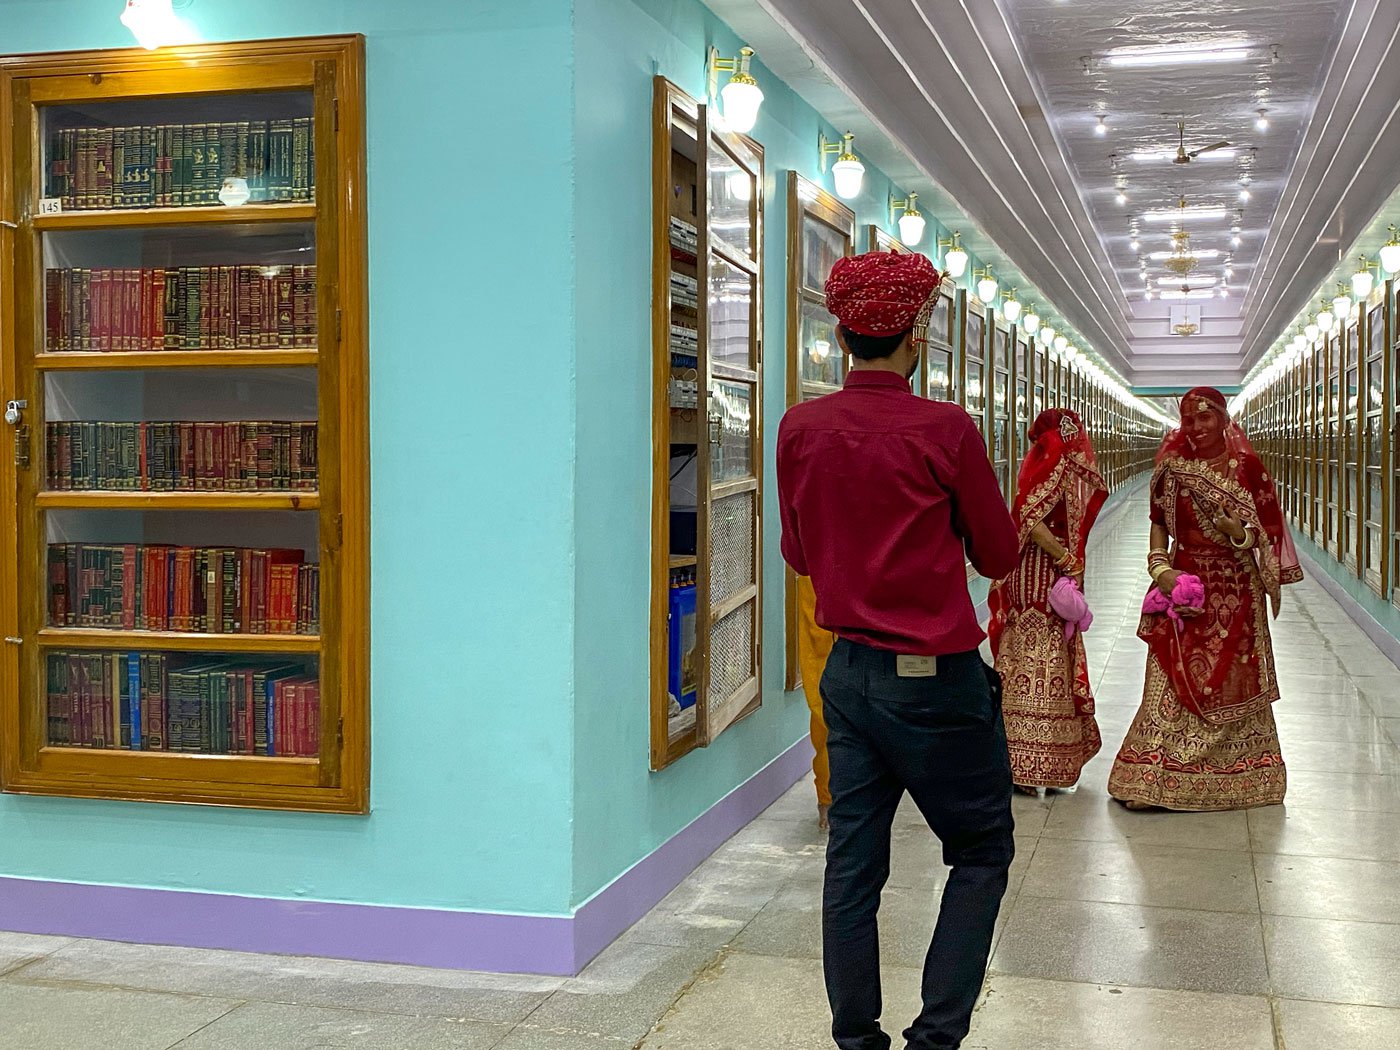 Visitors to the temple also drop into the library, now a tourist attraction as well